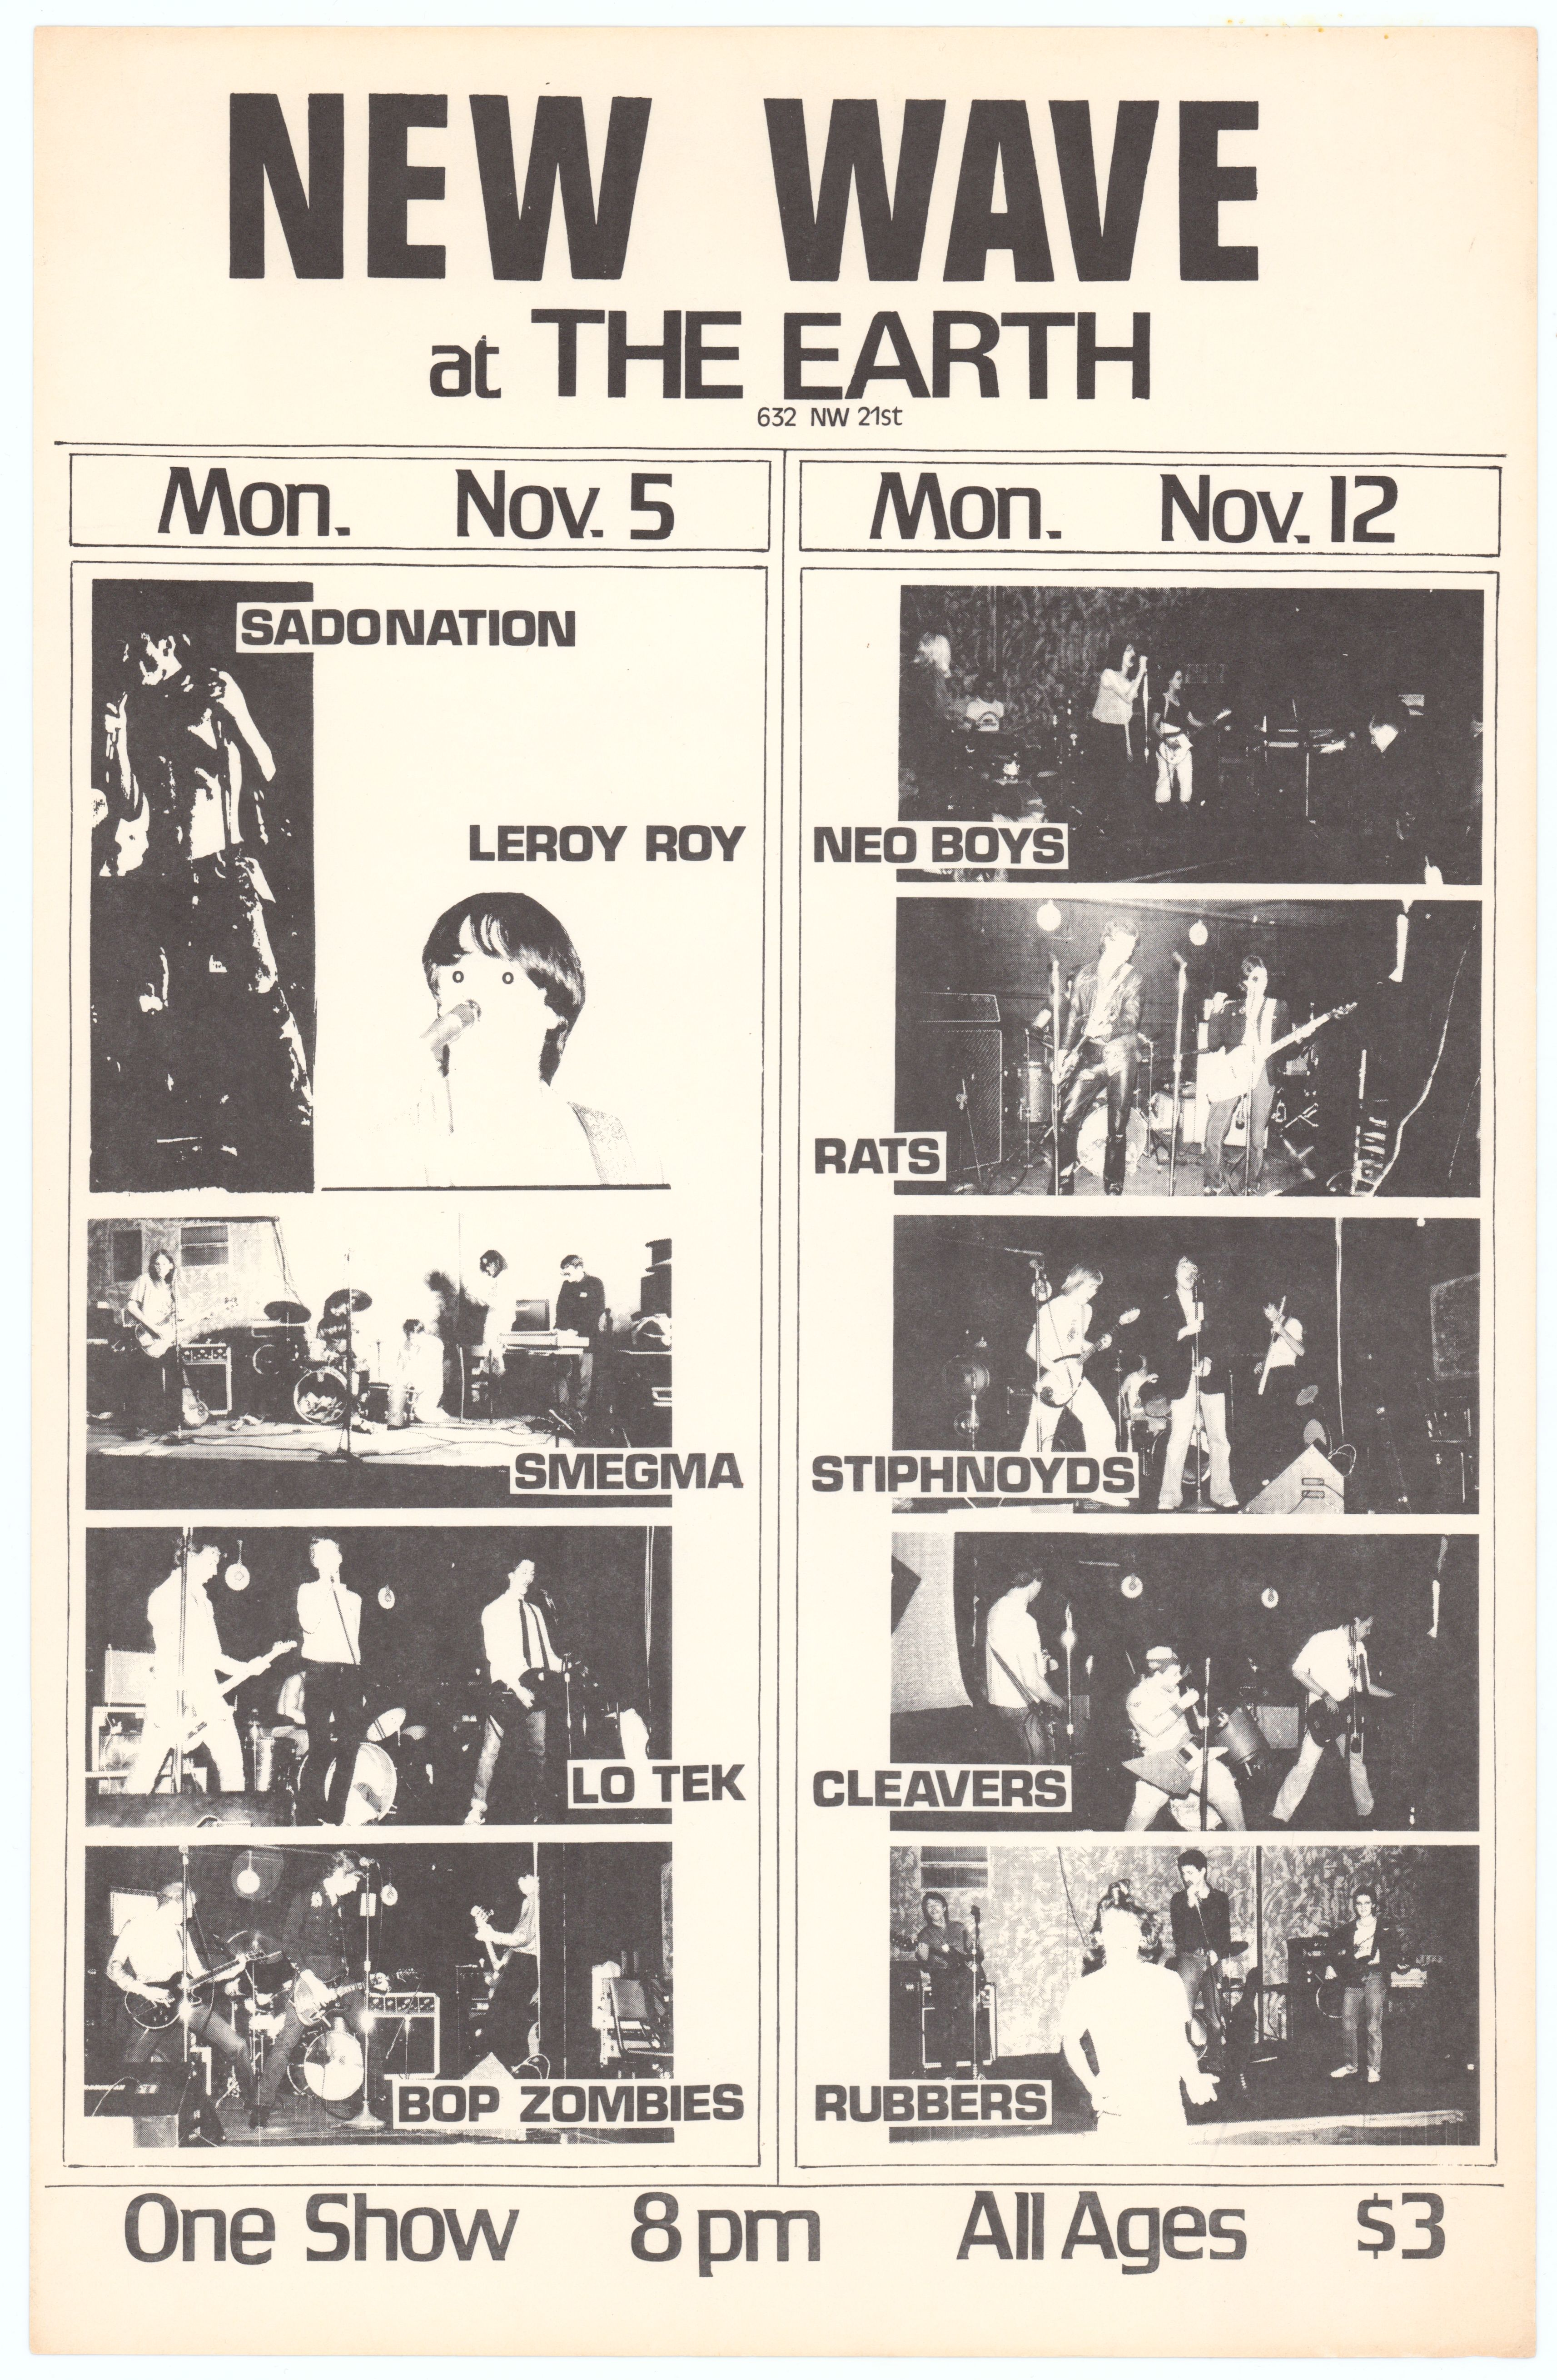 Leroy Roy & Neo Boys The Earth 1979 Concert Poster